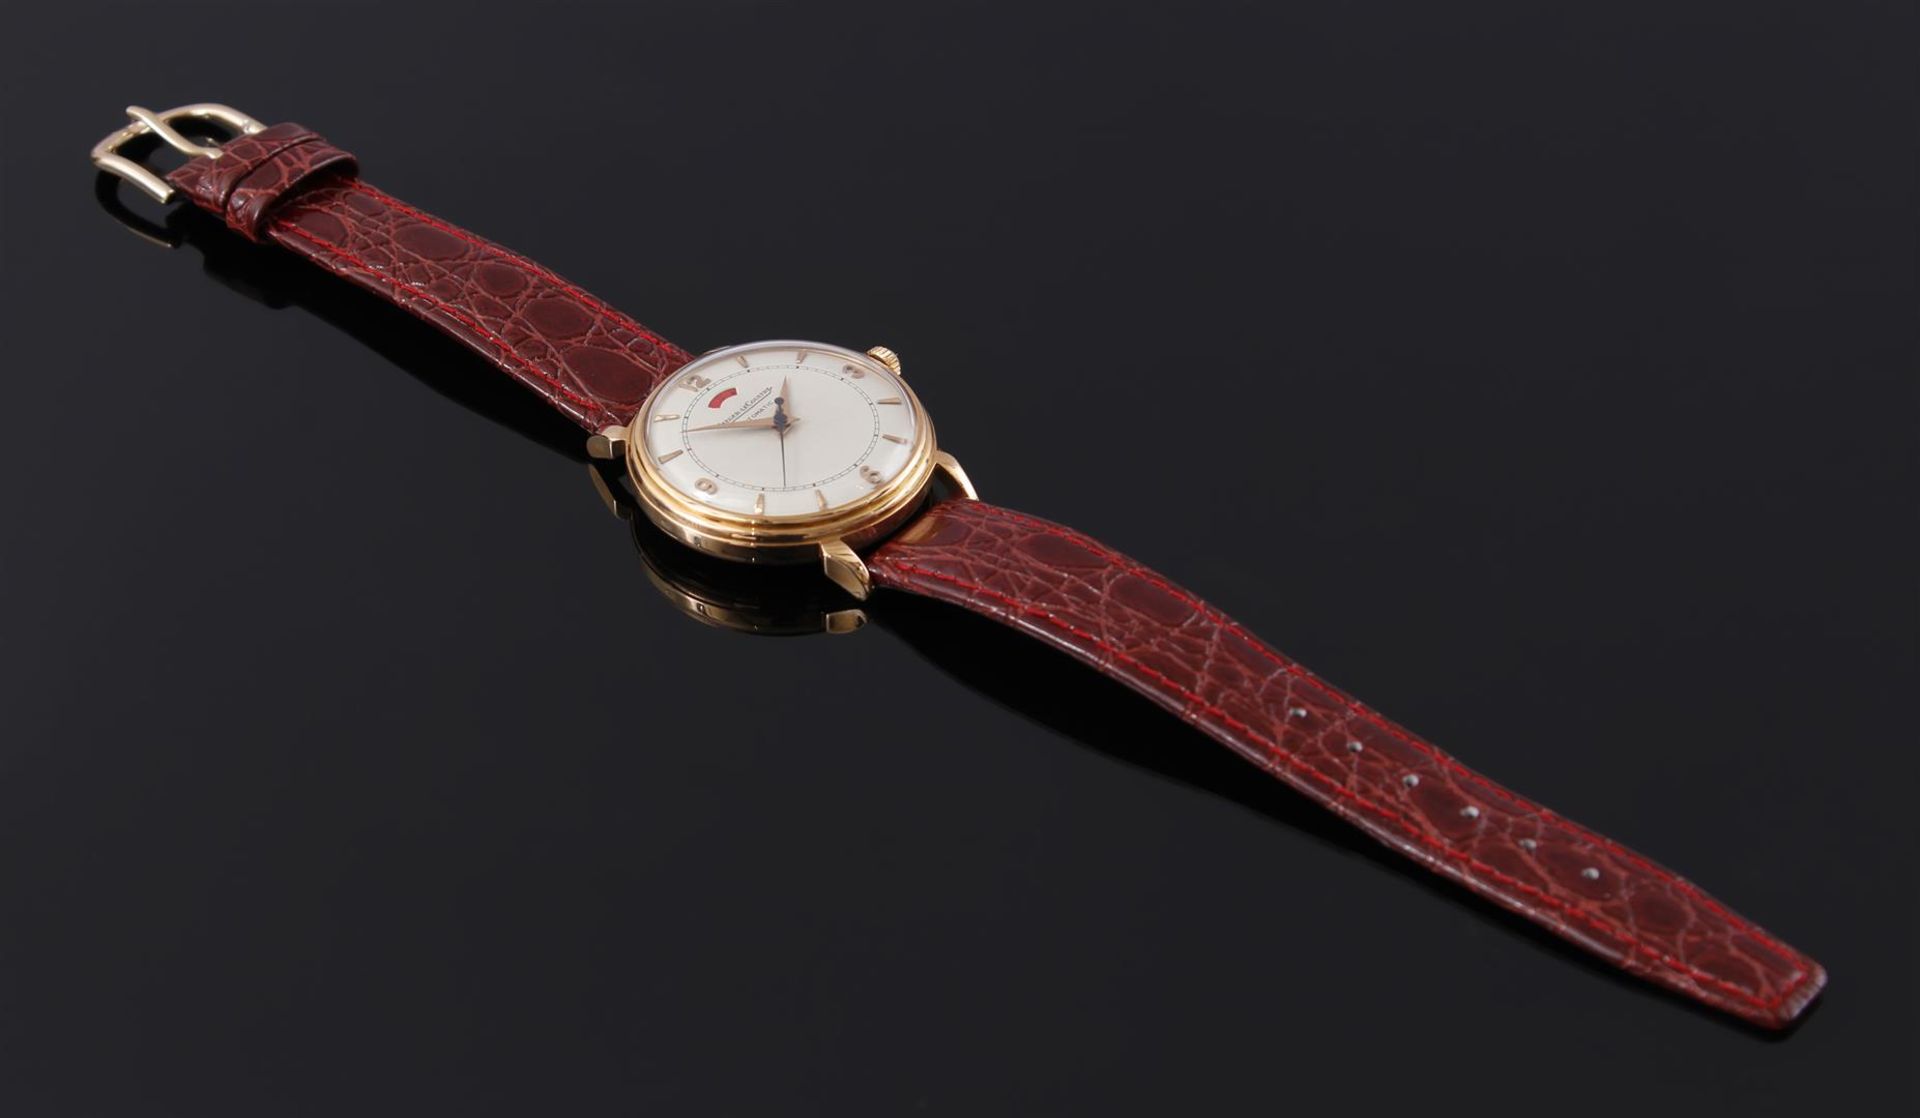 Jaeger LeCoultre wristwatch - Image 2 of 2